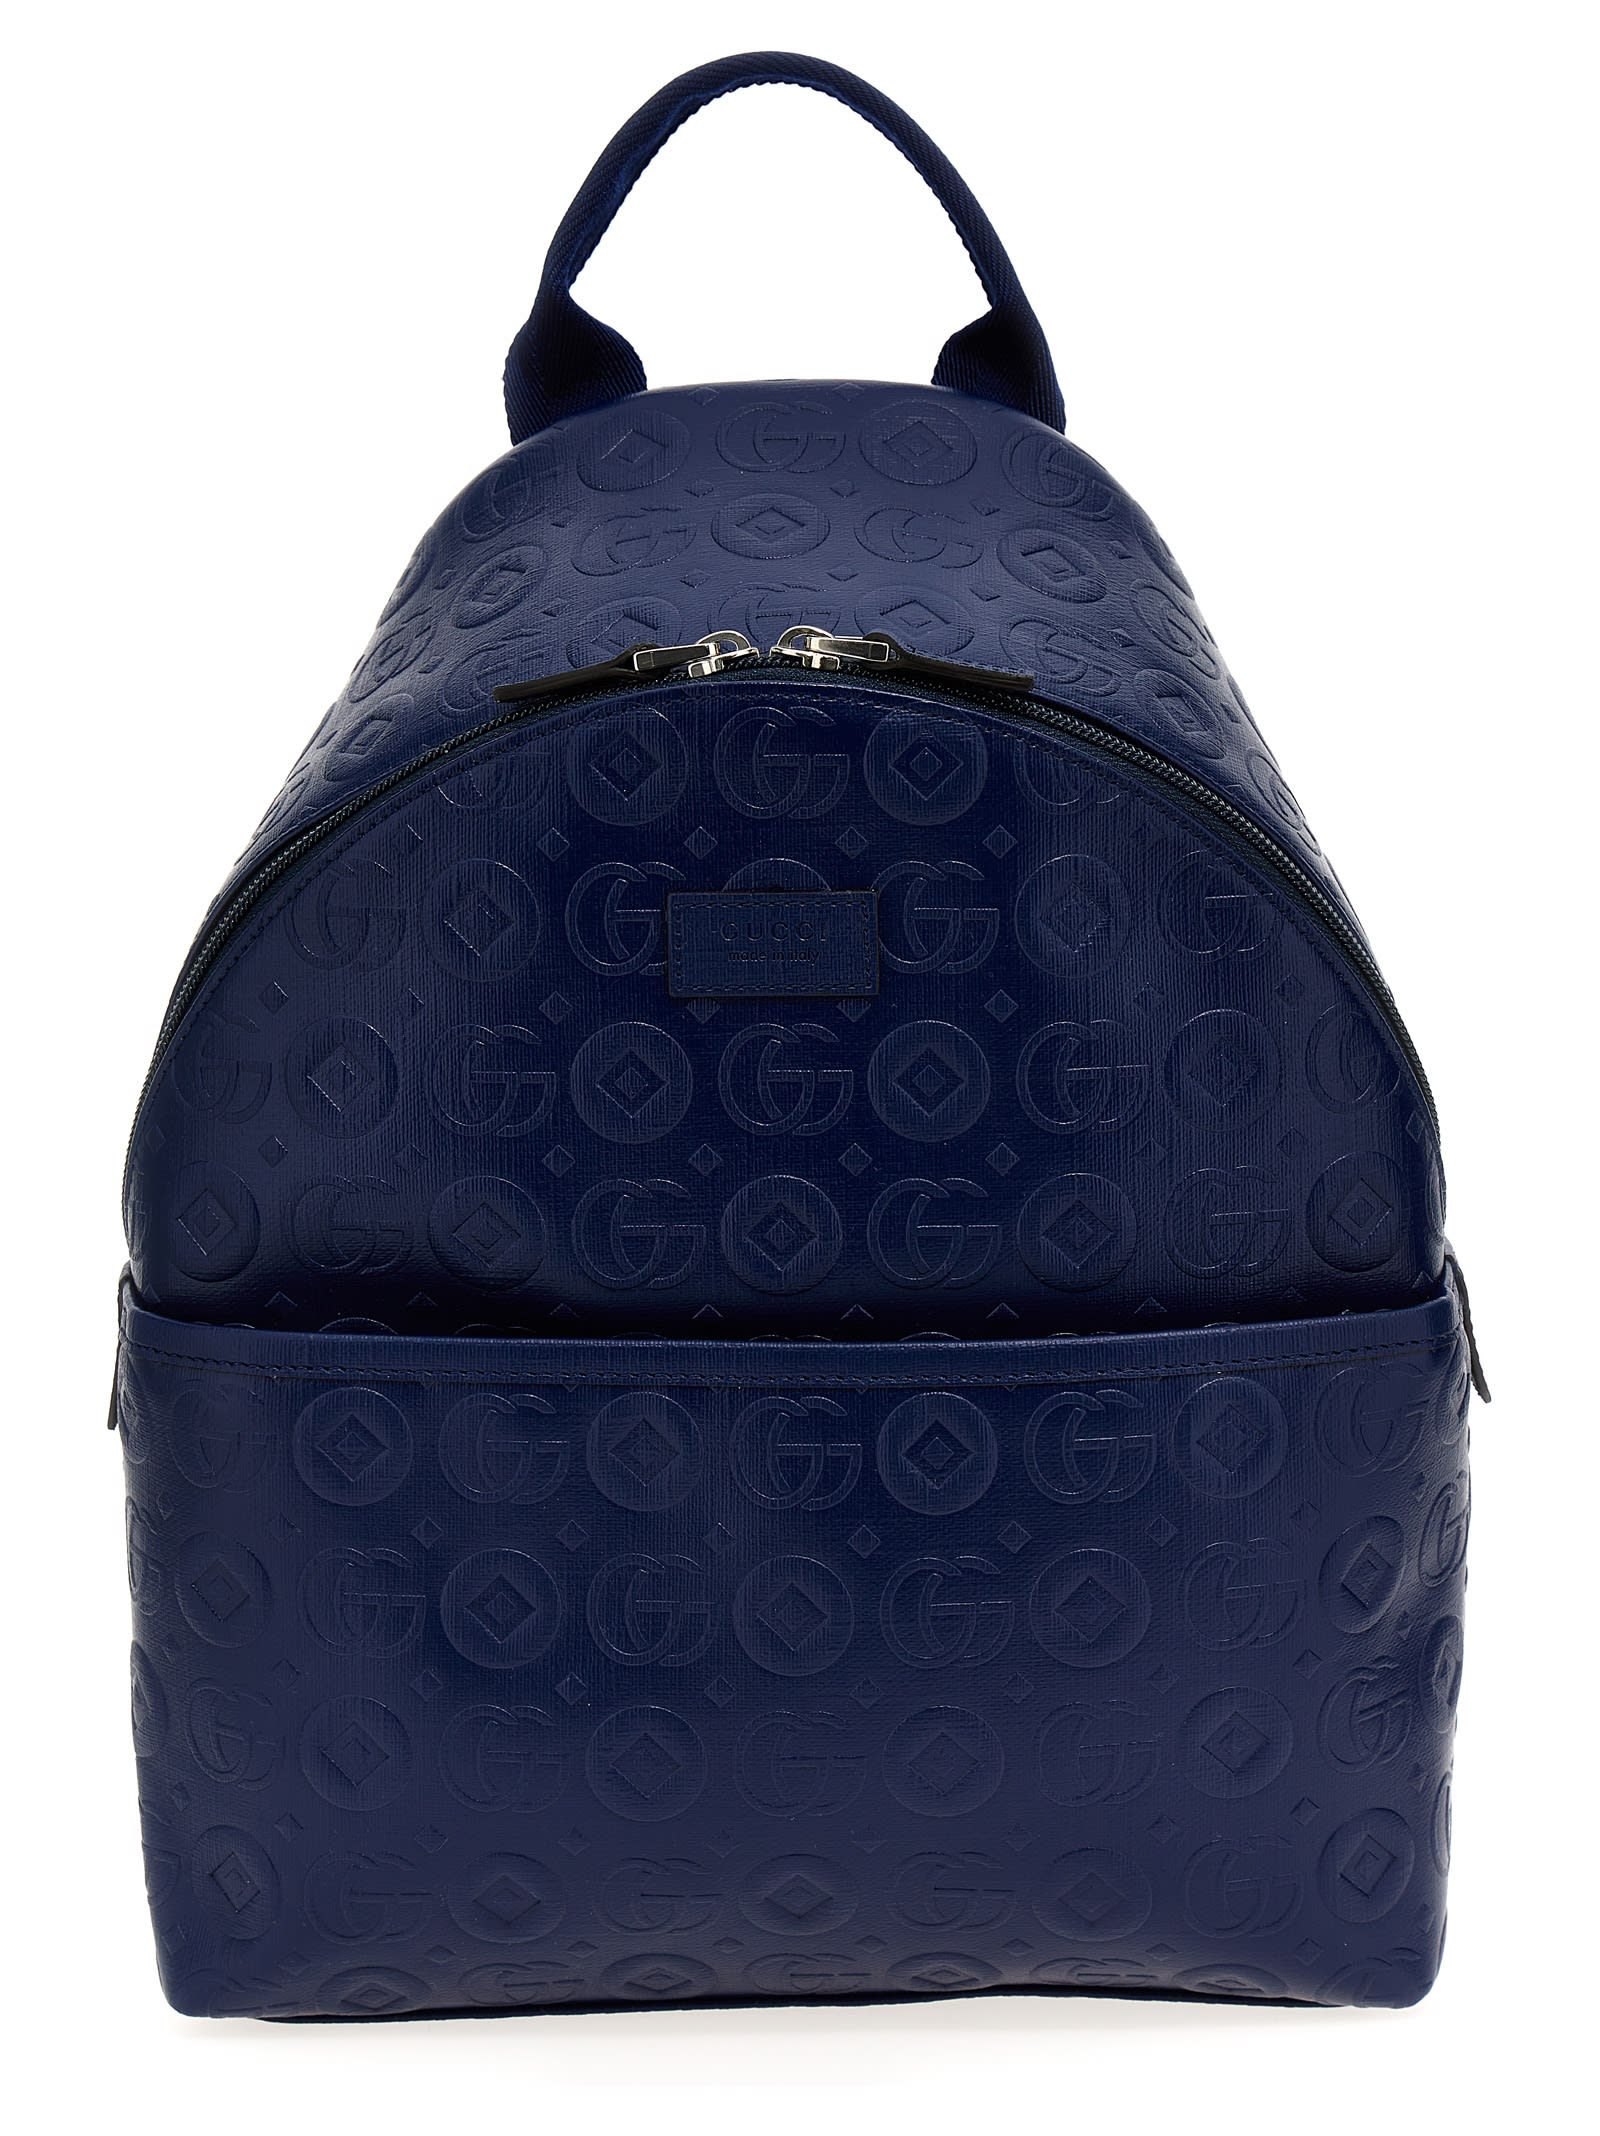 Black With Chrome Double G GUCCI Backpack – SILLY SAPP